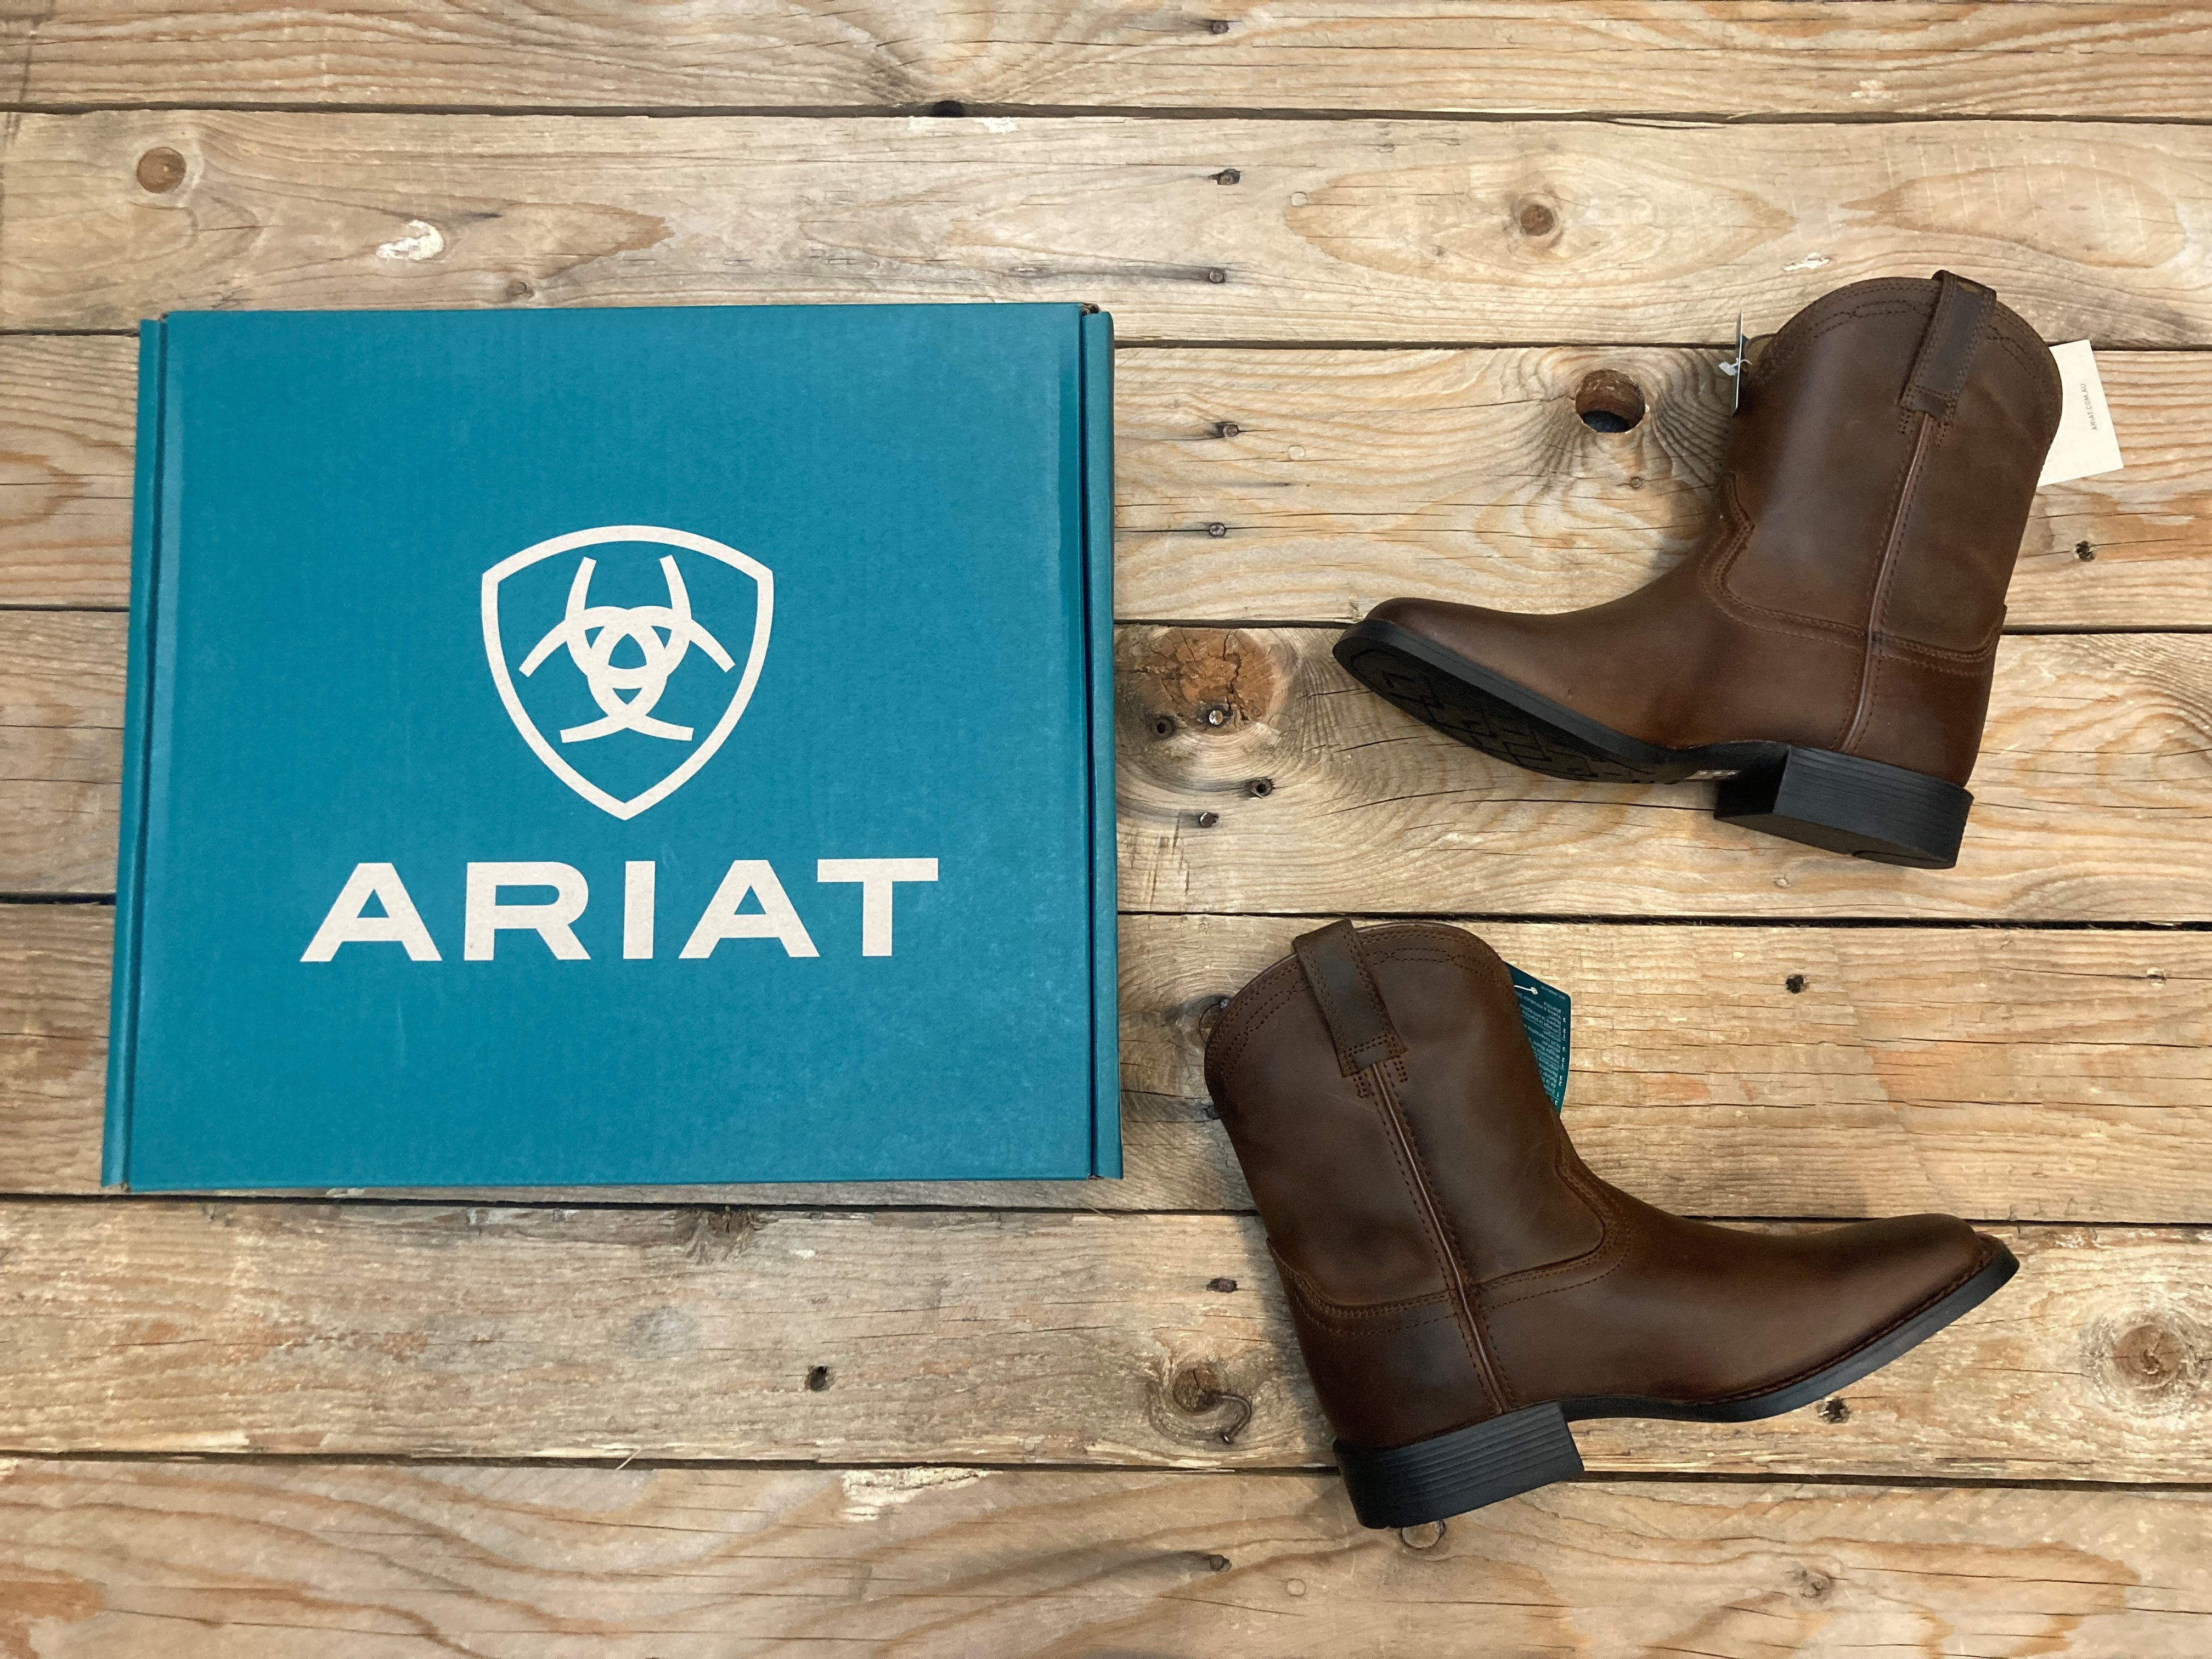 Youth Ariat Heritage Roper Square Toe Boot (4096884506701)